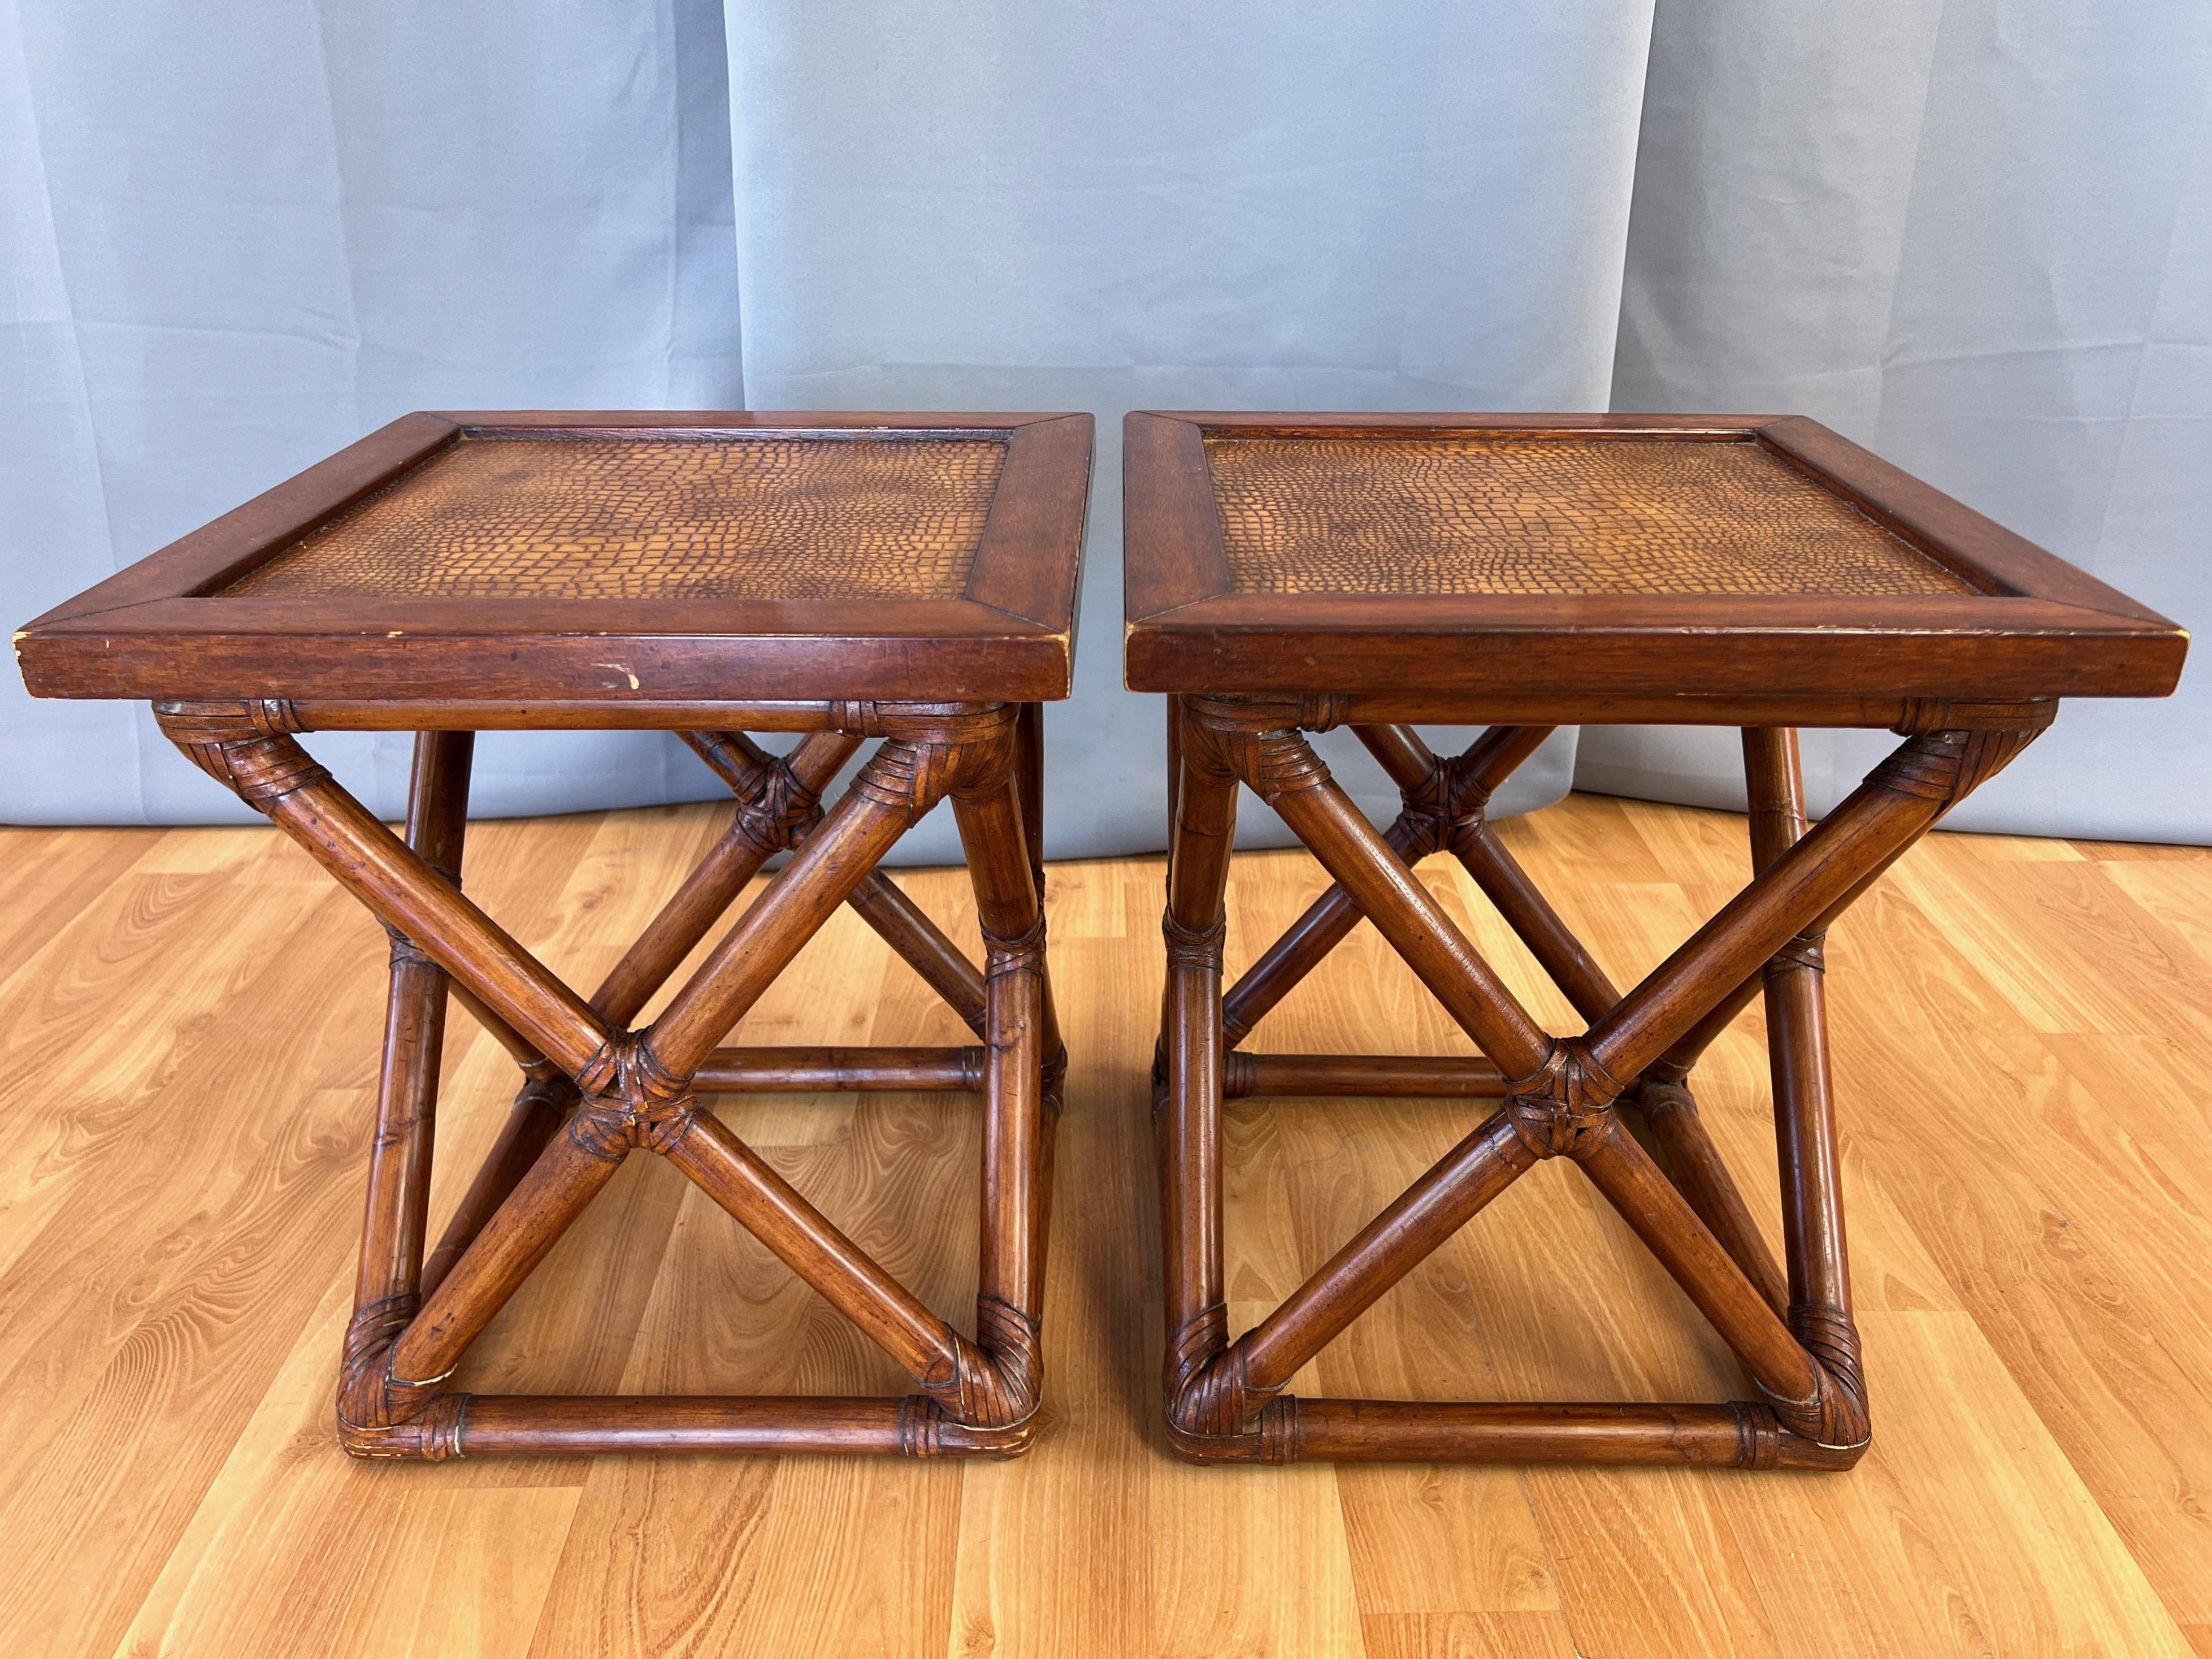 Pair of Palecek Rattan End Tables with Faux Crocodile Leather Tops, c. 2010 For Sale 8